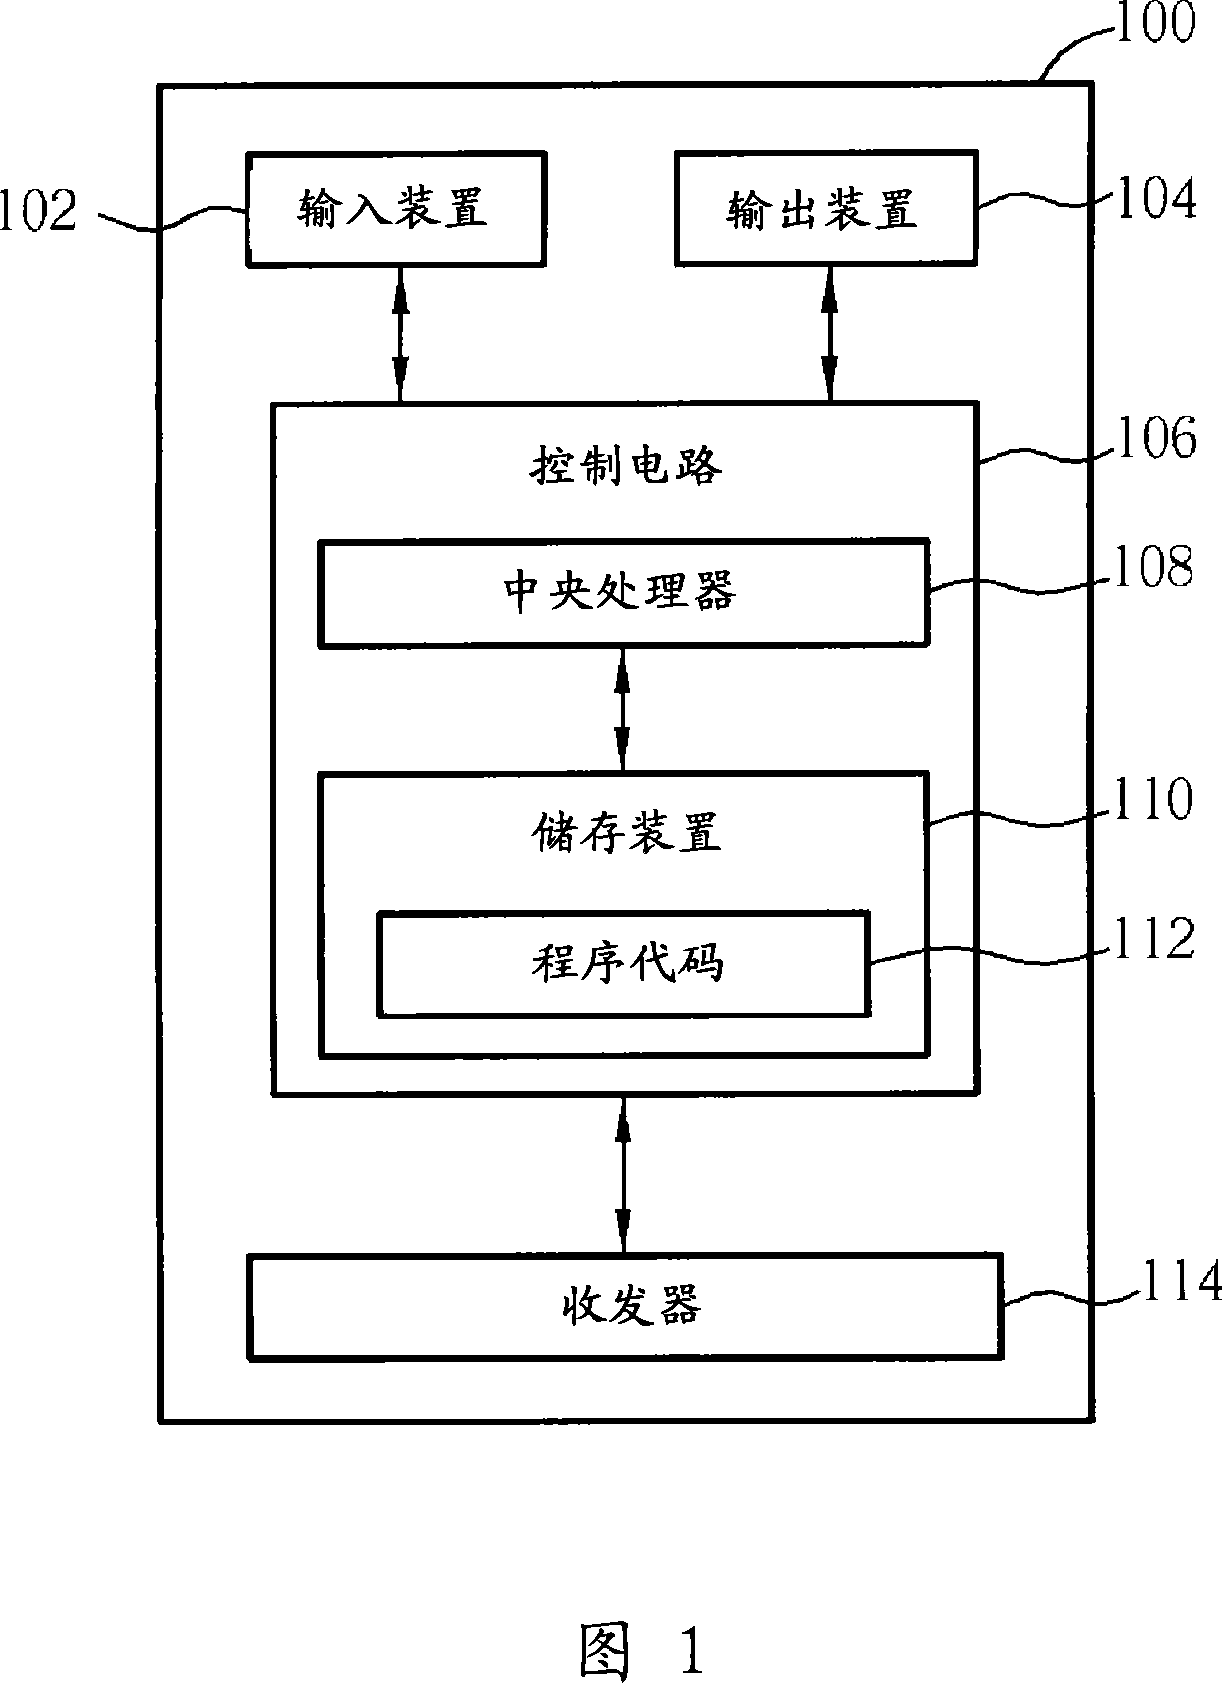 Method and apparatus for detection local nack in a wireless communications system